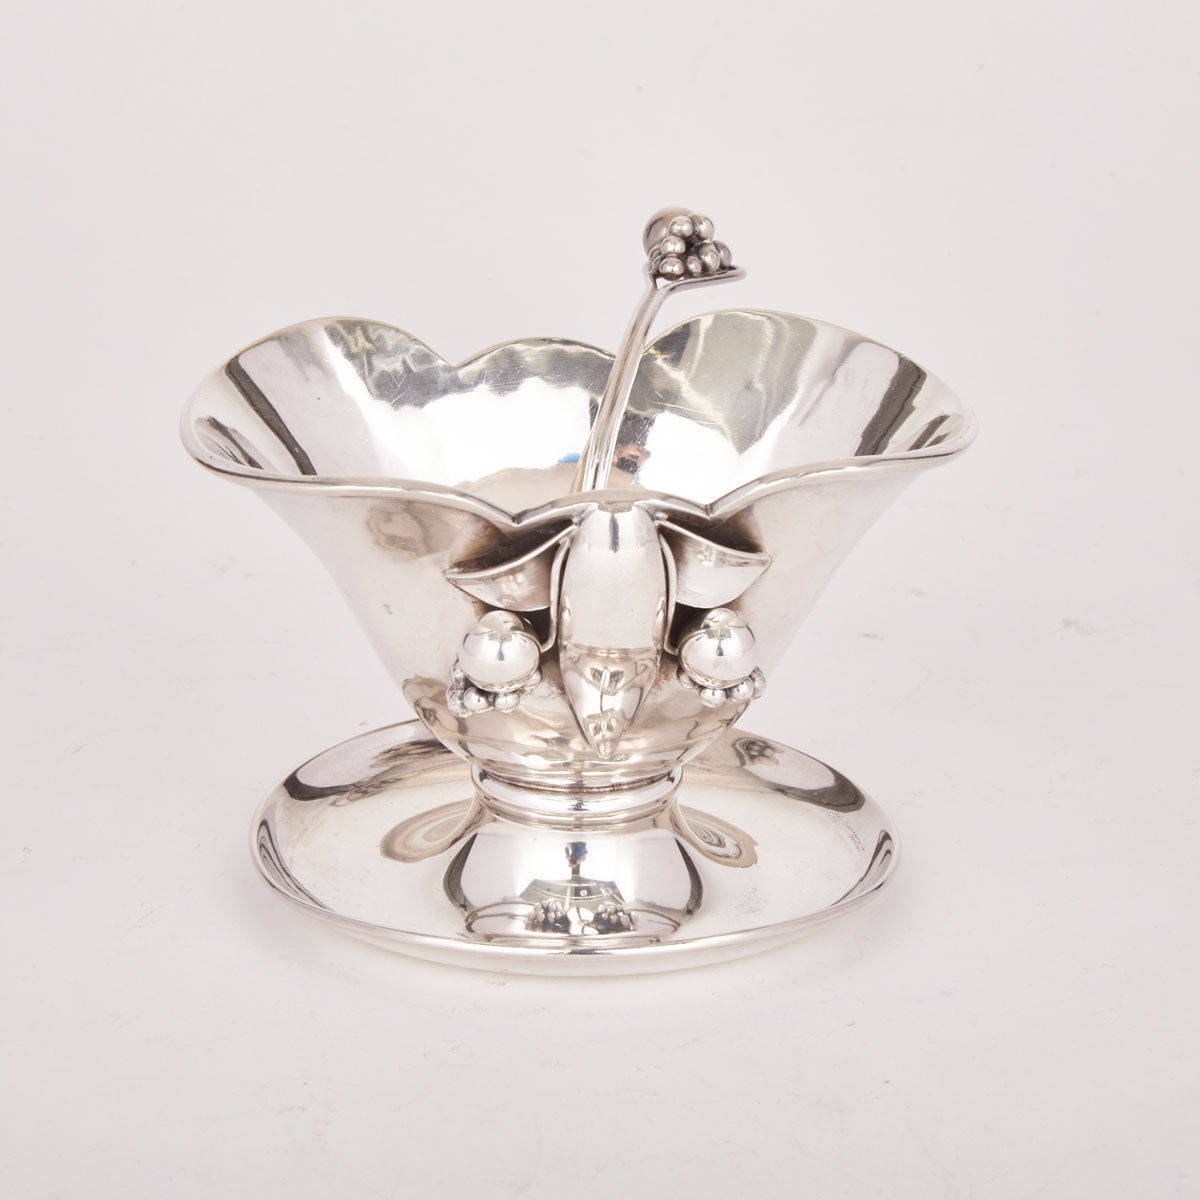 Canadian Silver Sauce Boat with Ladle, Carl Poul Petersen, Montreal, Que., mid-20th century